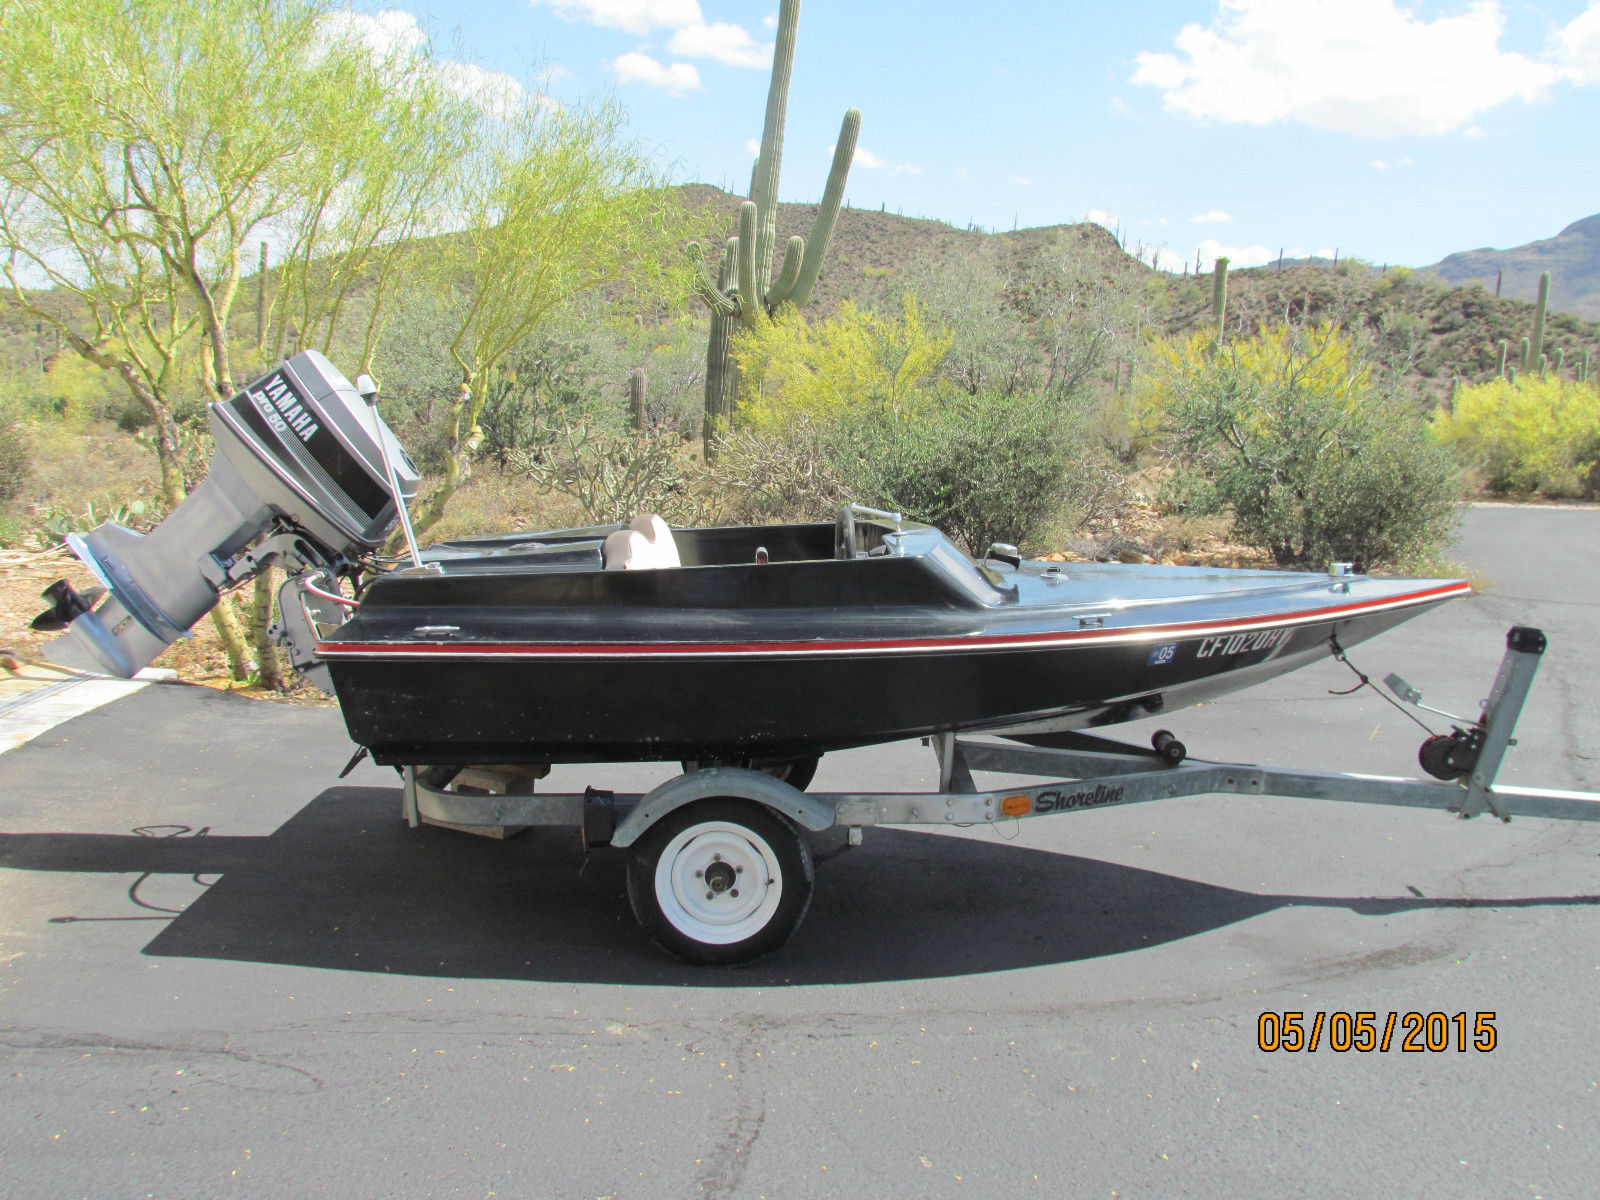 13' Hustler Wildcat Boat With Motor And Trailer